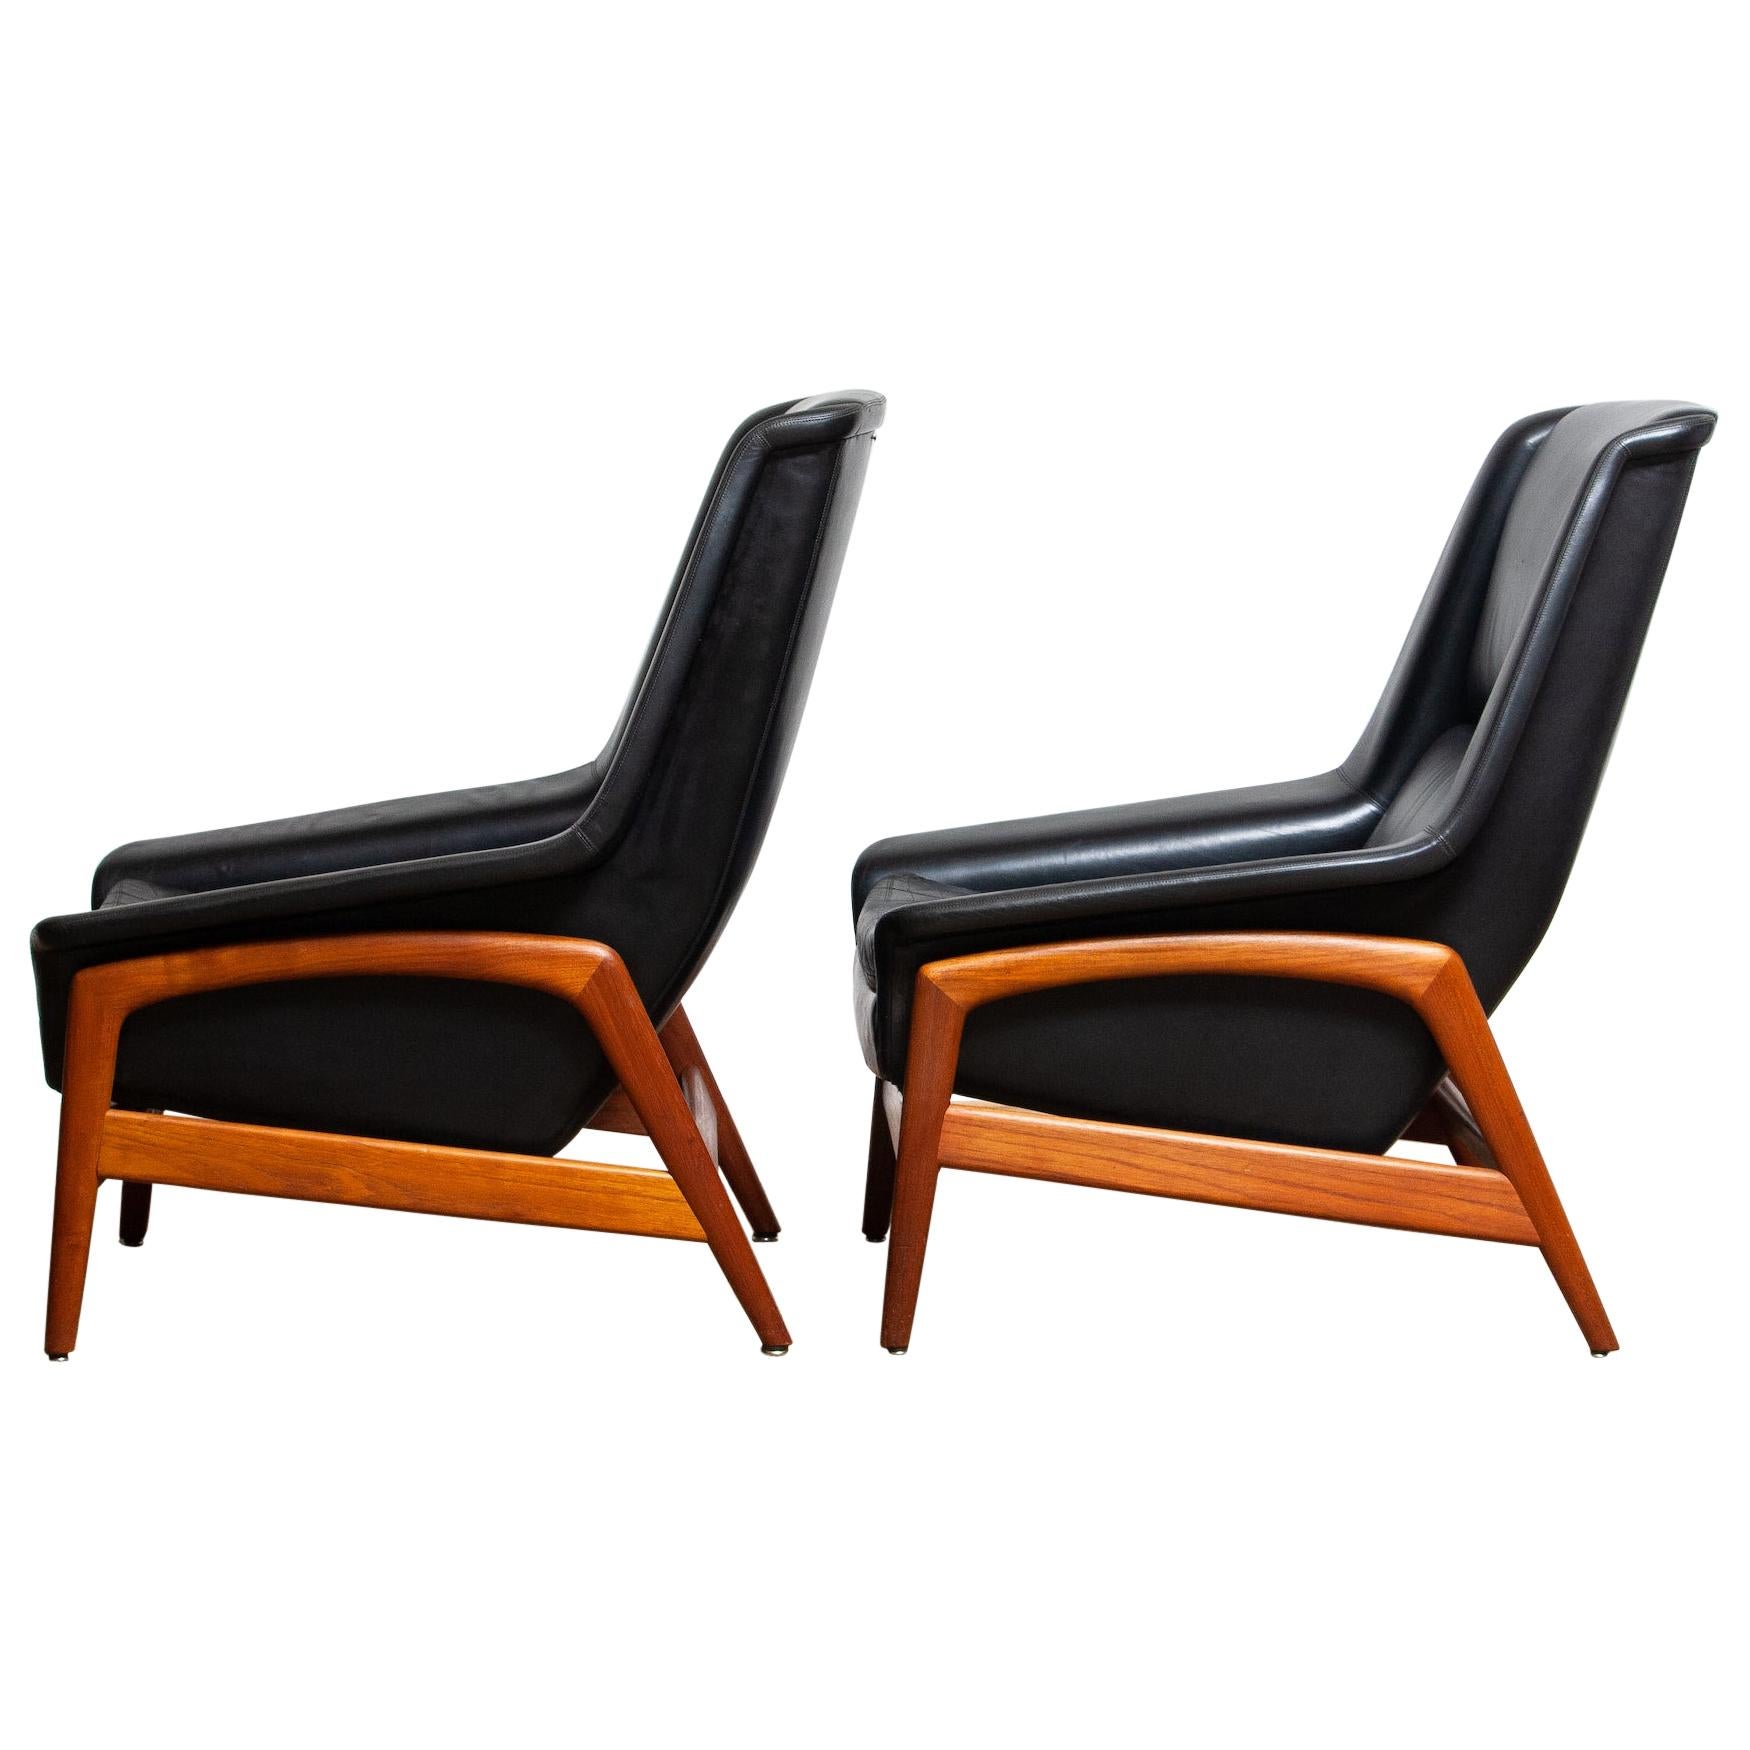 Swedish 1960s Pair of Lounge Chairs 'Profil', Folke Ohlsson for DUX in Leather and Teak